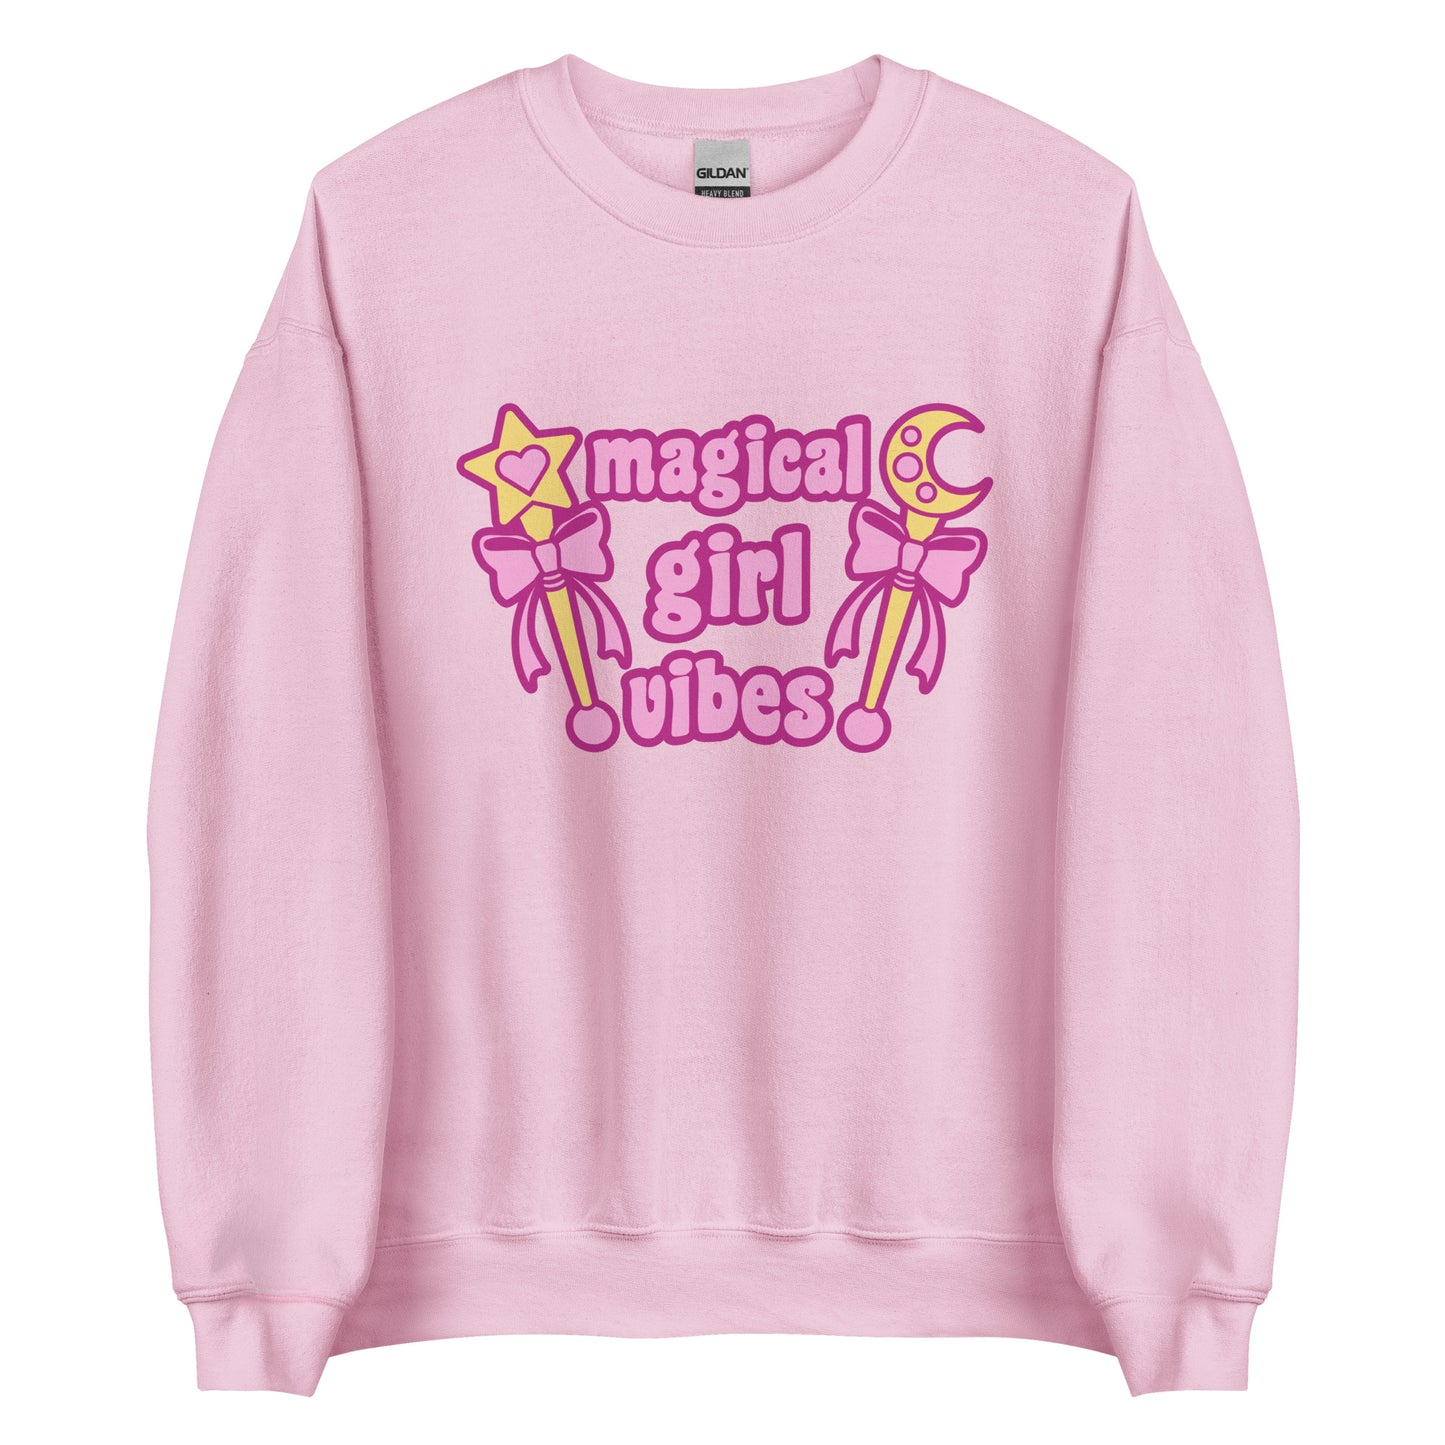 A light pink crewneck sweatshirt featuring two gold wands with pink bows and pink text reading "Magical girl vibes"